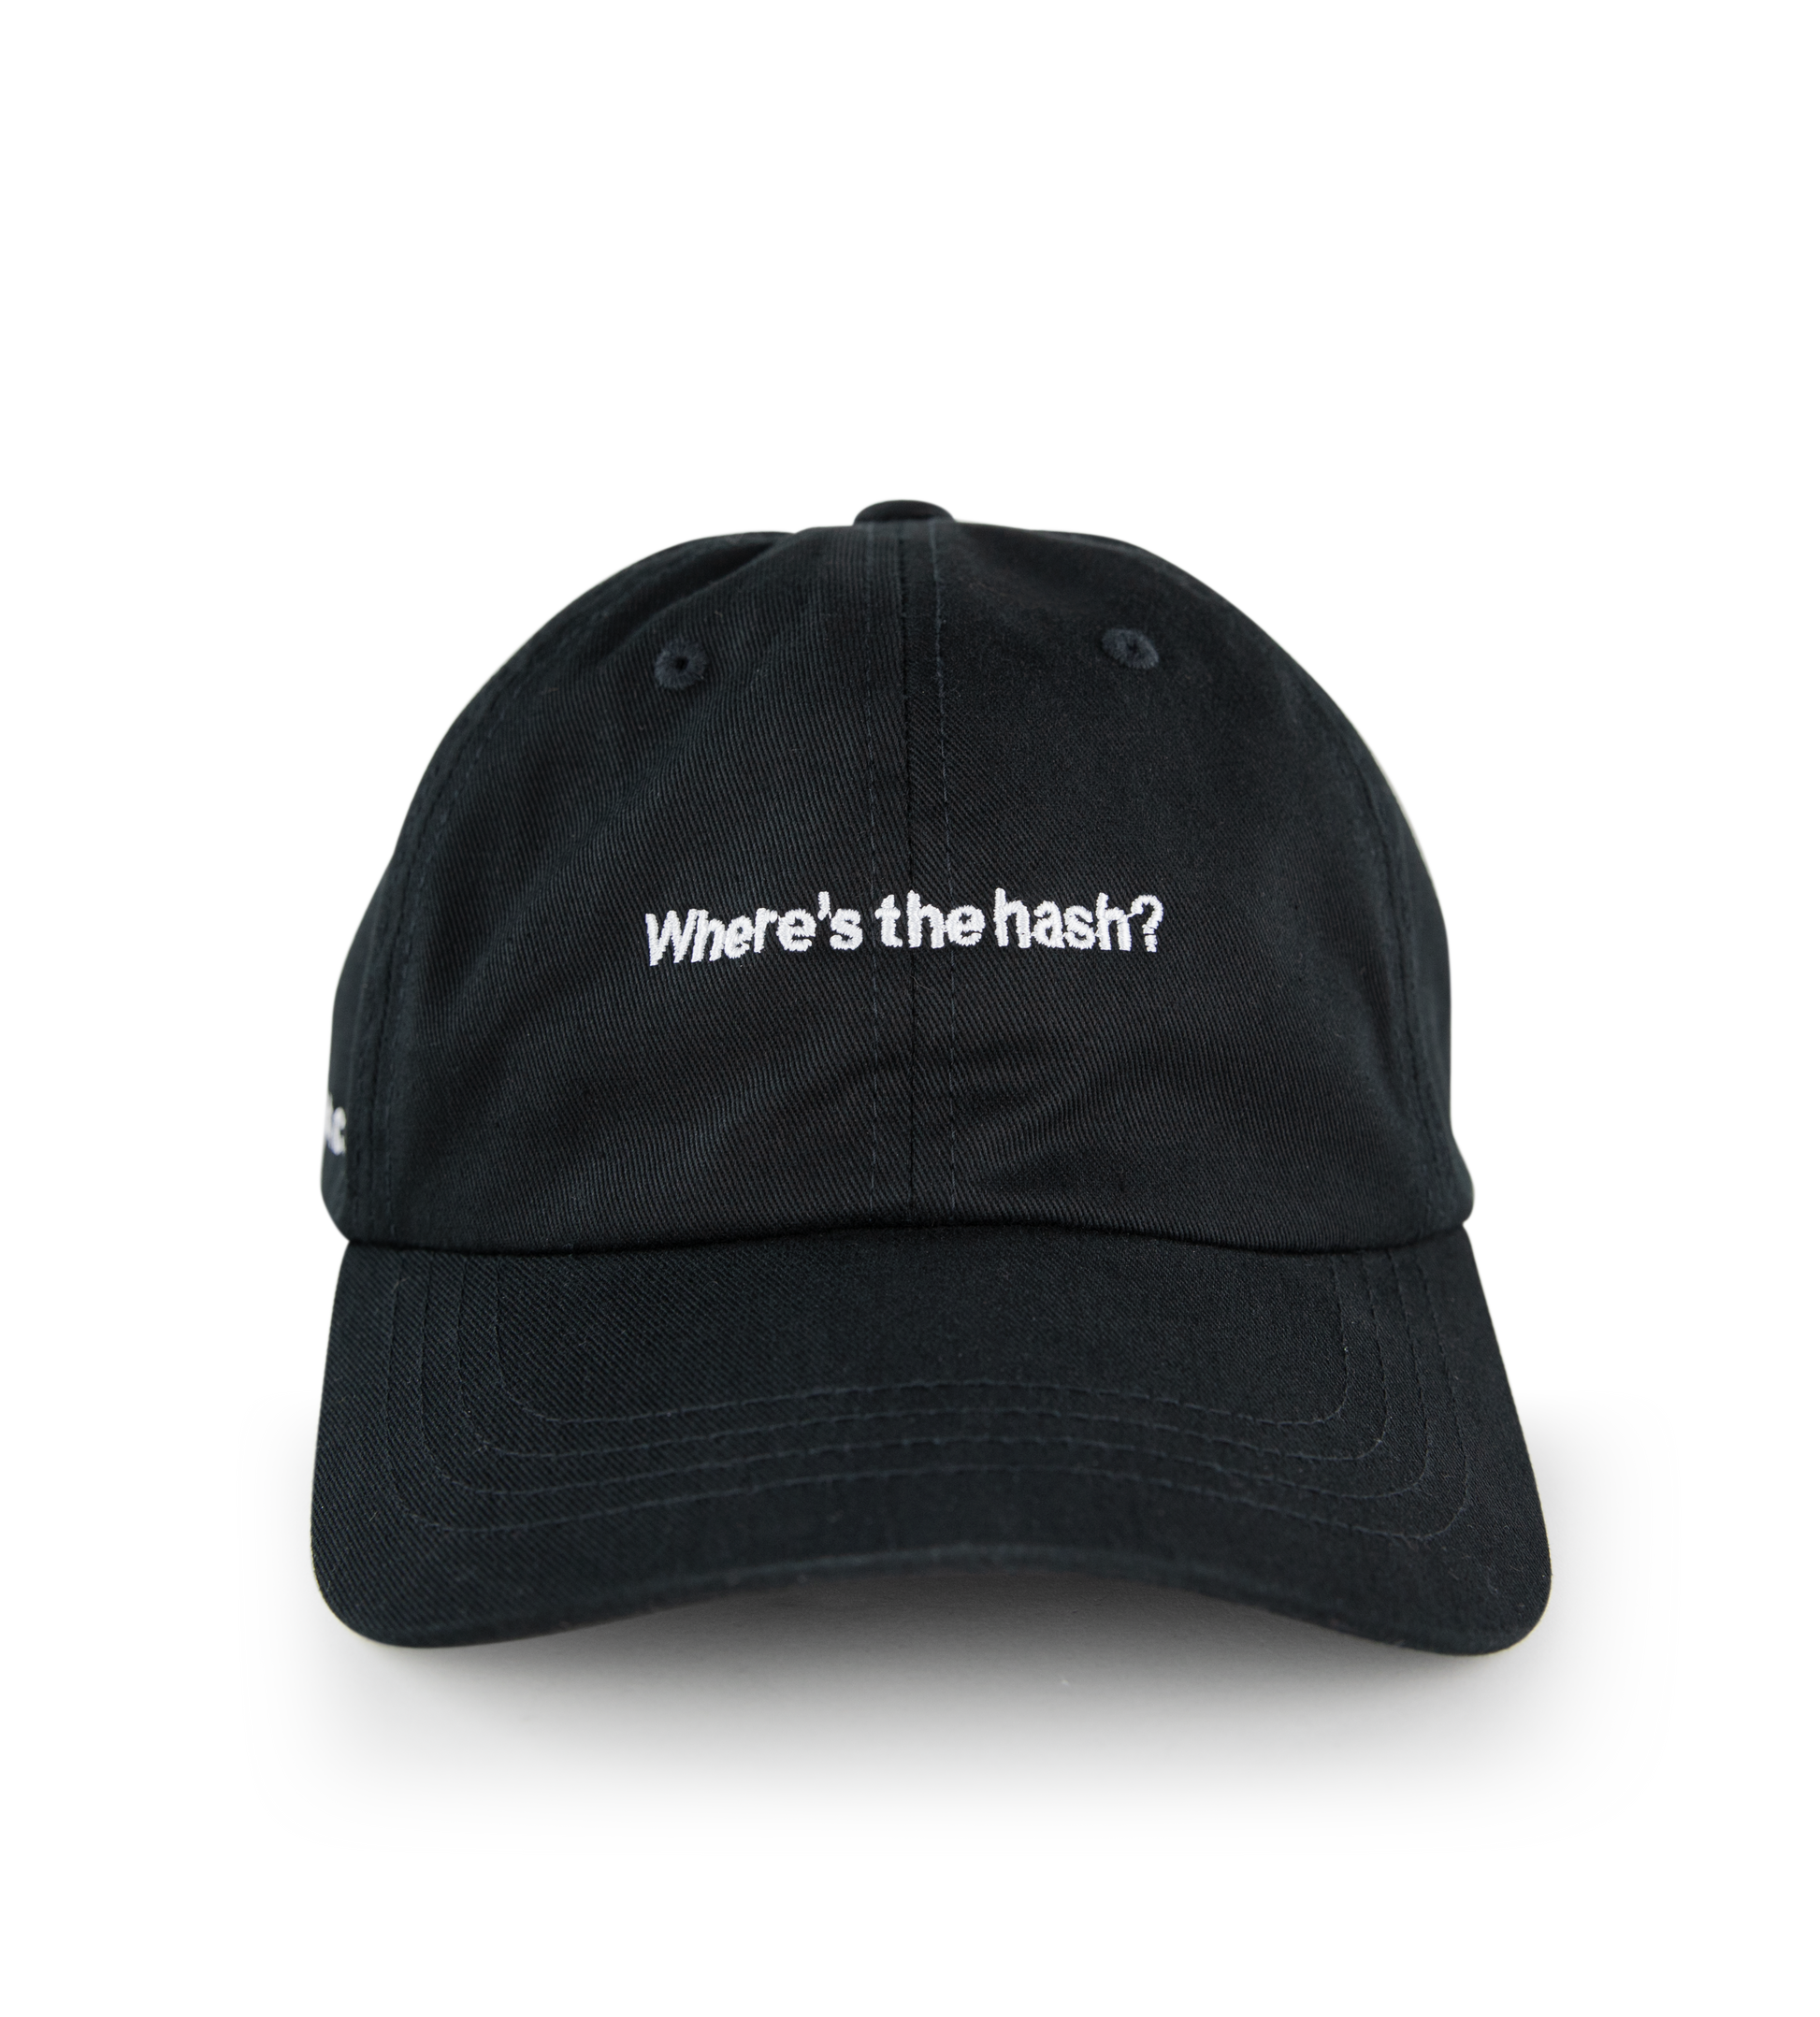 Front shot of hash hat reading "Where's the hash?"